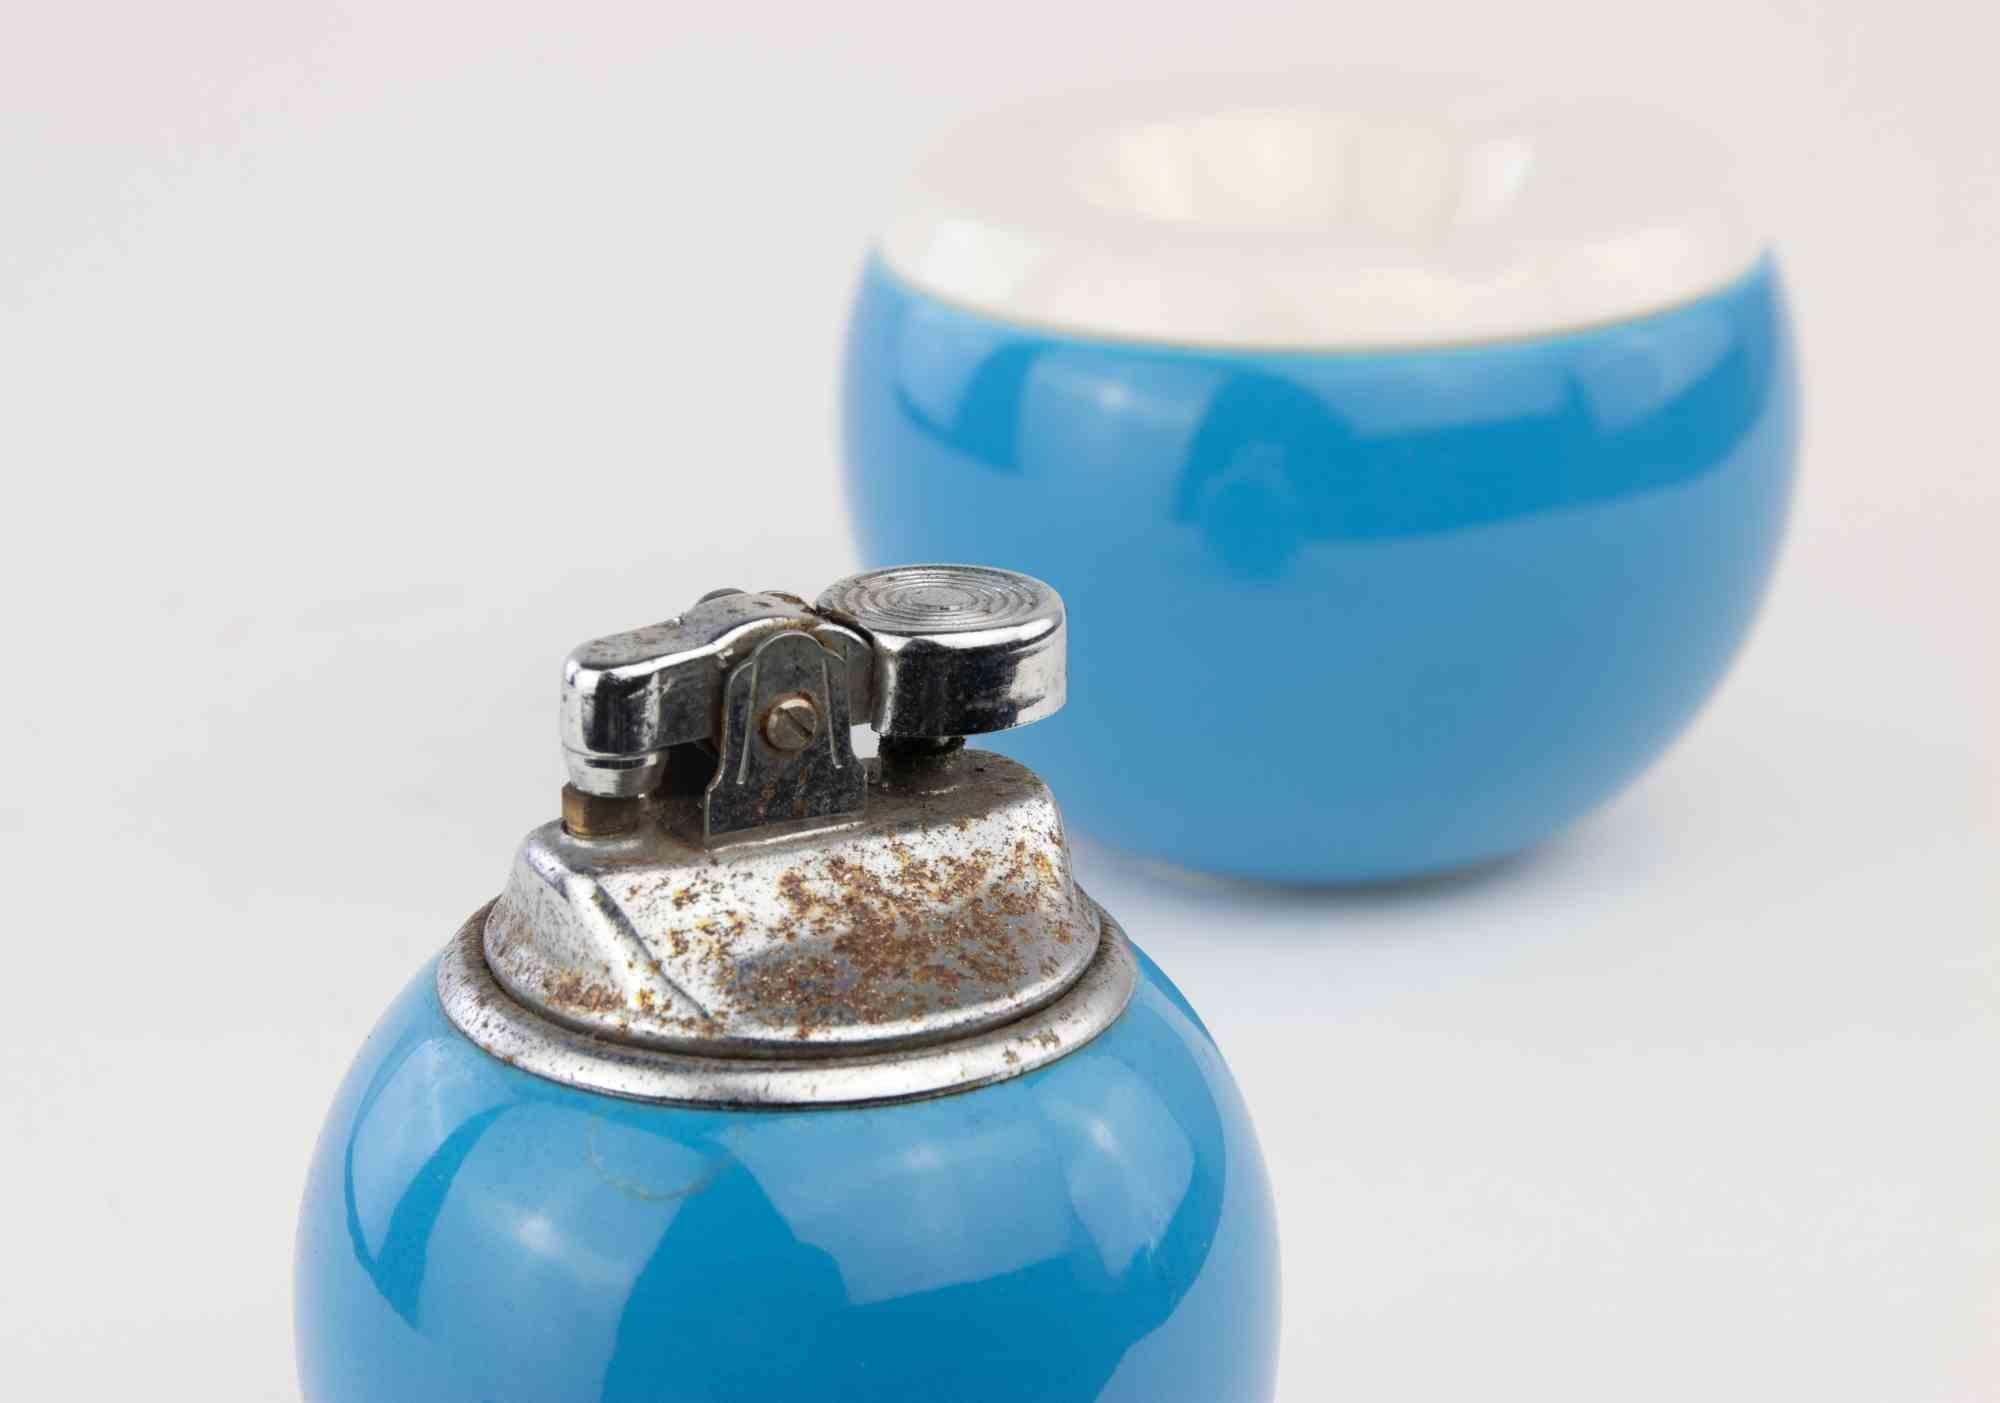 Smoking Set is a  decorative object realized in the 1970s.

A ceramic blue colored smoking set composed by a lighter and an ashtray.

Dimensions:

Lighter: h.7.5 x 7 cm

Ashtray: h. 7 x 9.5 cm